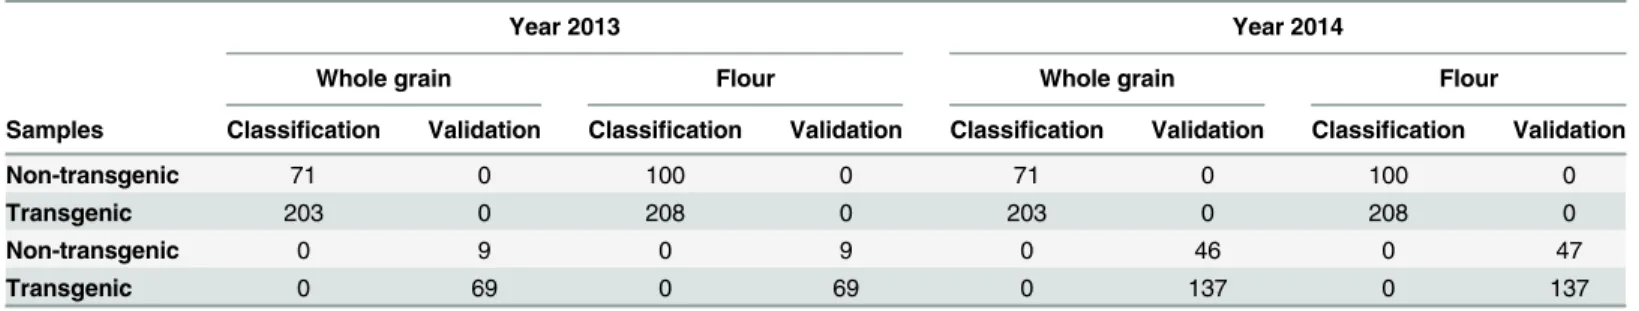 Table 2 shows sample distribution for the classification and validation sets. As shown, 71 sam- sam-ples from non-transgenic wheats, and 203 samsam-ples from transgenic lines were used for grain classification whereas 100 and 208 samples from non-transgeni